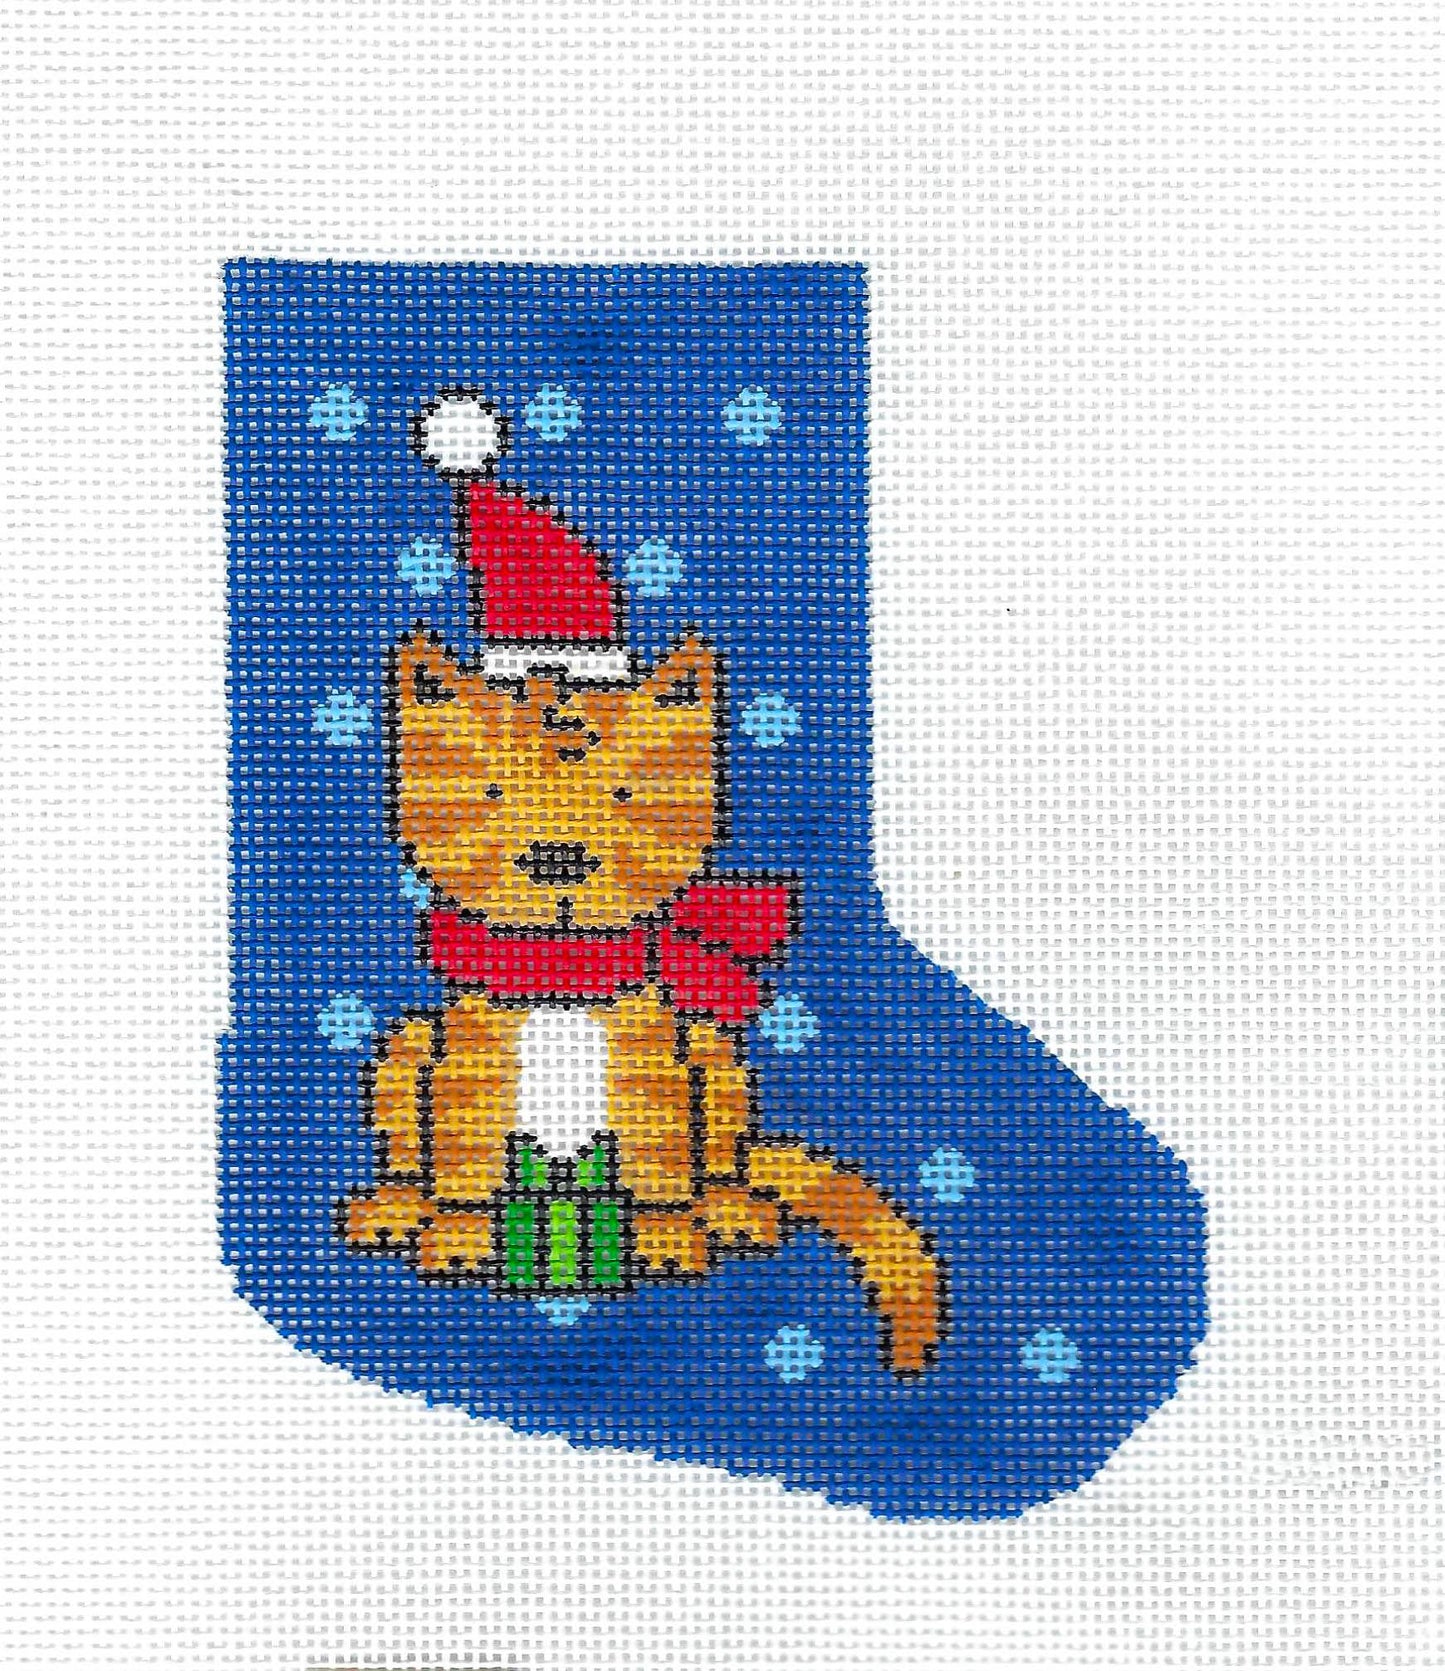 Mini Stocking ~ Christmas Santa Kitty with Gift Mini Stocking Ornament on 18 mesh handpainted Needlepoint Canvas by LEE *RETIRED*